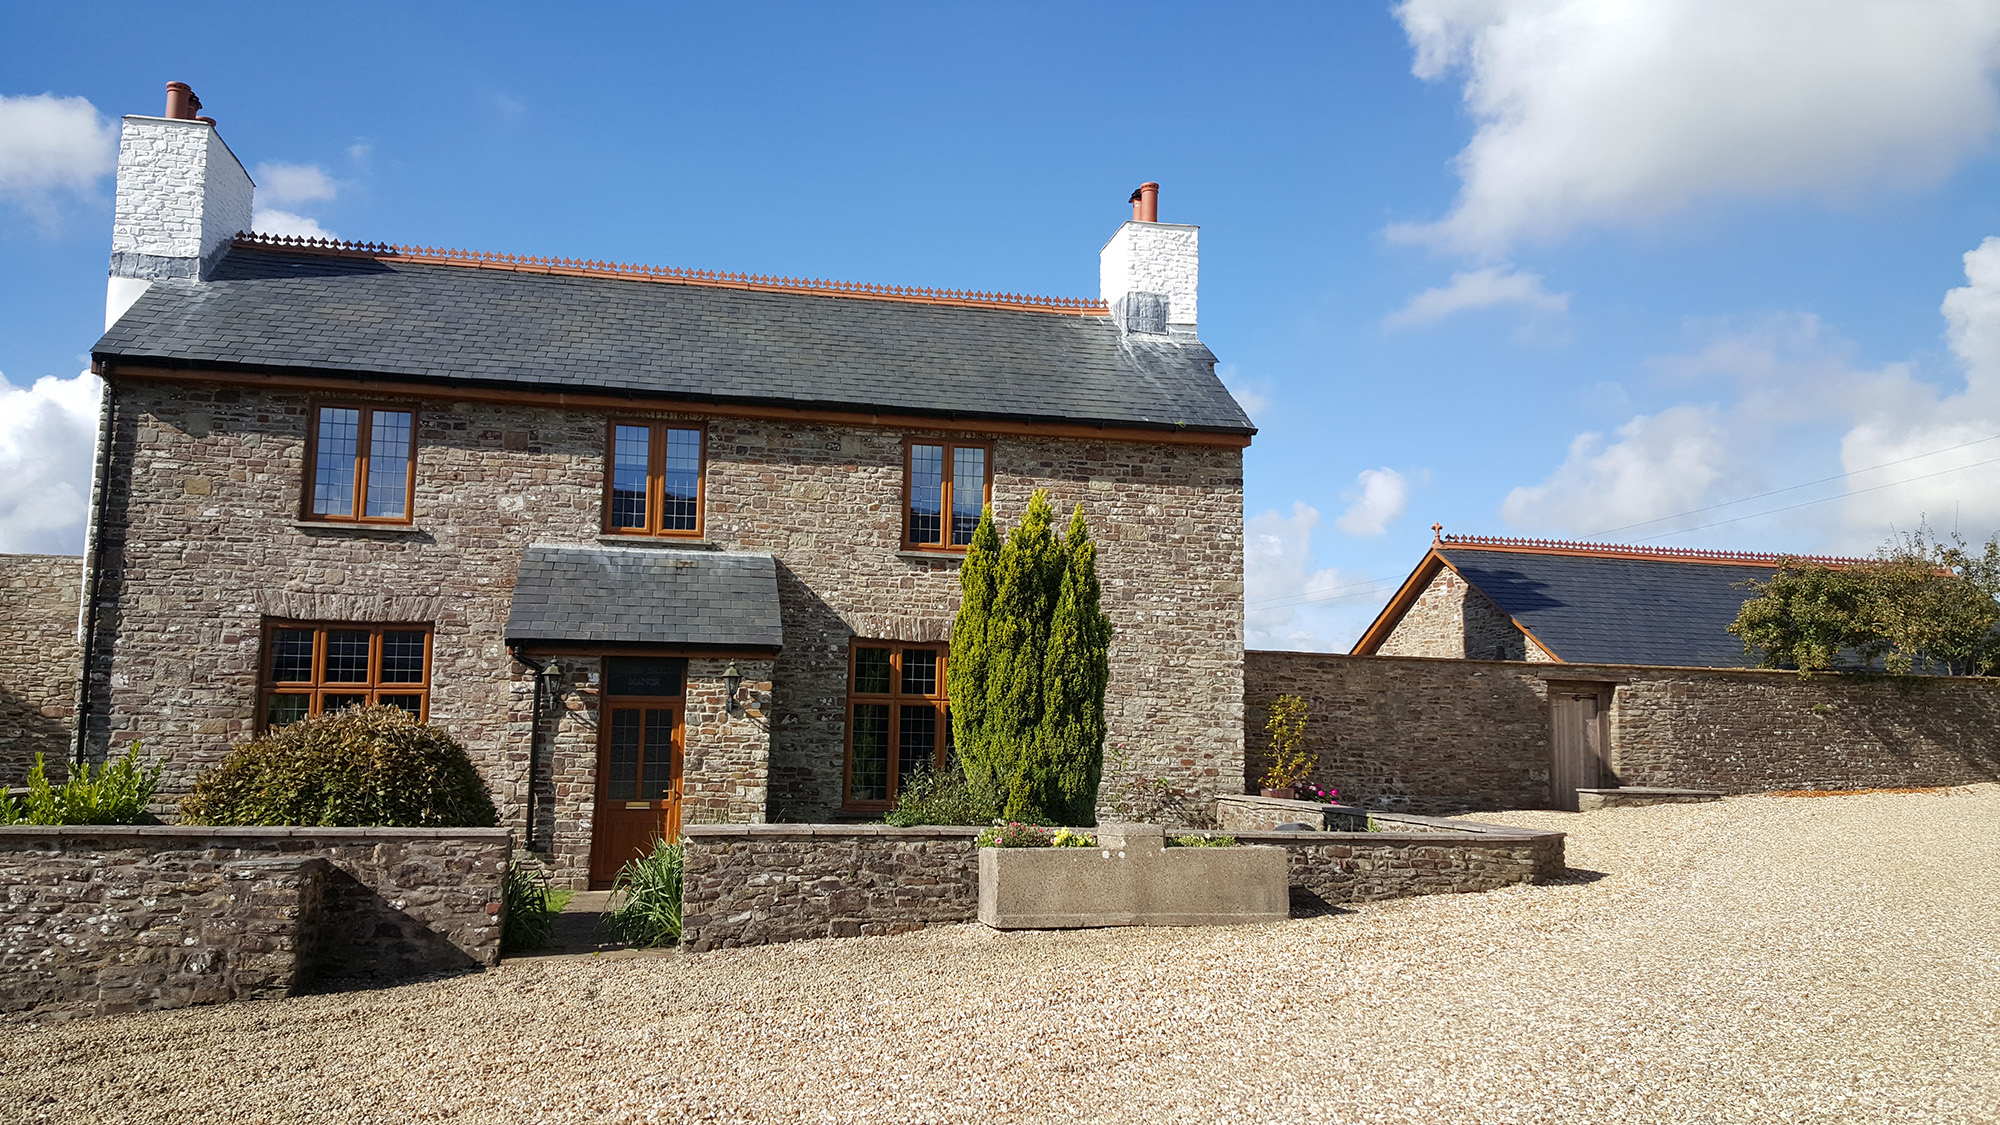 5 bed country house to rent in High Bickington, Devon - Property Image 1